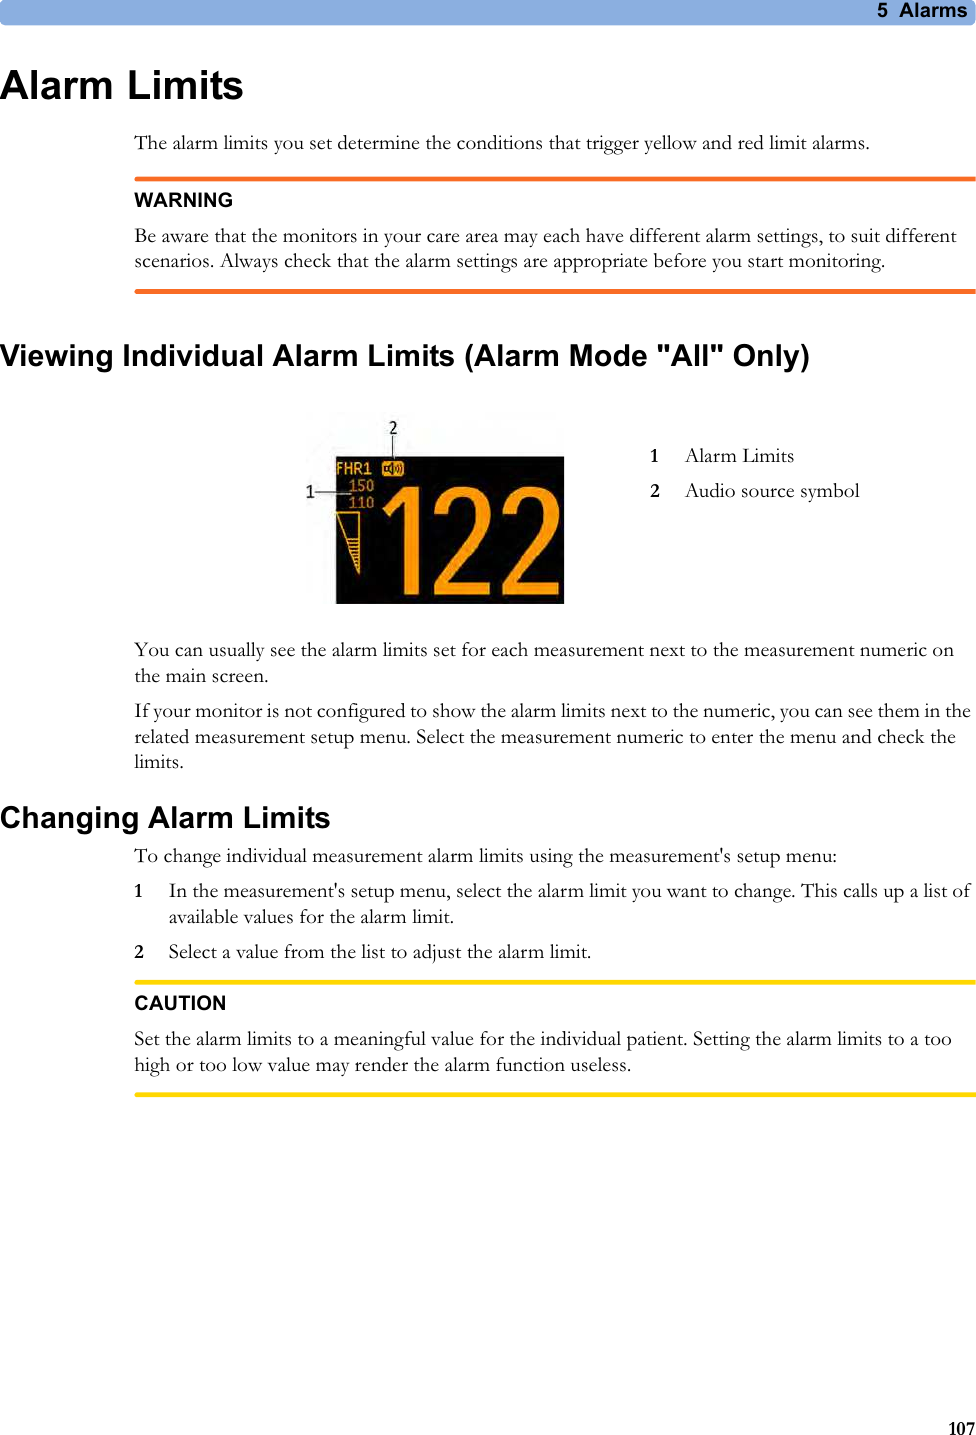 5  Alarms107Alarm LimitsThe alarm limits you set determine the conditions that trigger yellow and red limit alarms.WARNINGBe aware that the monitors in your care area may each have different alarm settings, to suit different scenarios. Always check that the alarm settings are appropriate before you start monitoring.Viewing Individual Alarm Limits (Alarm Mode &quot;All&quot; Only)You can usually see the alarm limits set for each measurement next to the measurement numeric on the main screen. If your monitor is not configured to show the alarm limits next to the numeric, you can see them in the related measurement setup menu. Select the measurement numeric to enter the menu and check the limits.Changing Alarm LimitsTo change individual measurement alarm limits using the measurement&apos;s setup menu:1In the measurement&apos;s setup menu, select the alarm limit you want to change. This calls up a list of available values for the alarm limit.2Select a value from the list to adjust the alarm limit.CAUTIONSet the alarm limits to a meaningful value for the individual patient. Setting the alarm limits to a too high or too low value may render the alarm function useless.1Alarm Limits2Audio source symbol